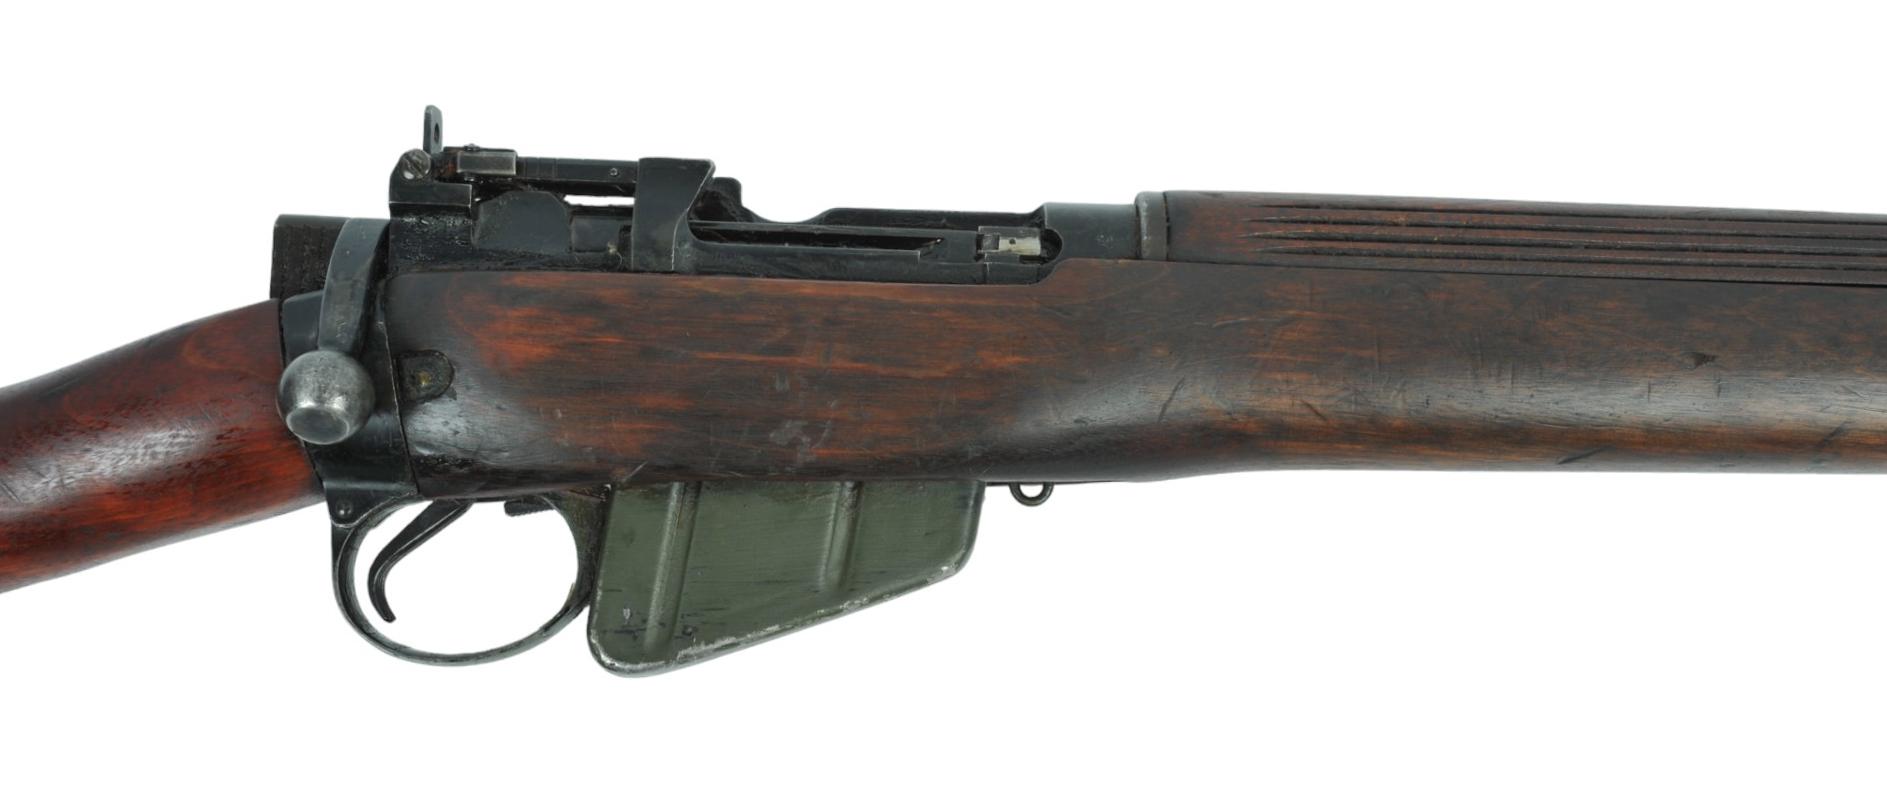 Canadian Military WWII era Long Branch #4 .303 Lee-Enfield Bolt-Action Rifle - FFL # 22L9672 (F1M1)